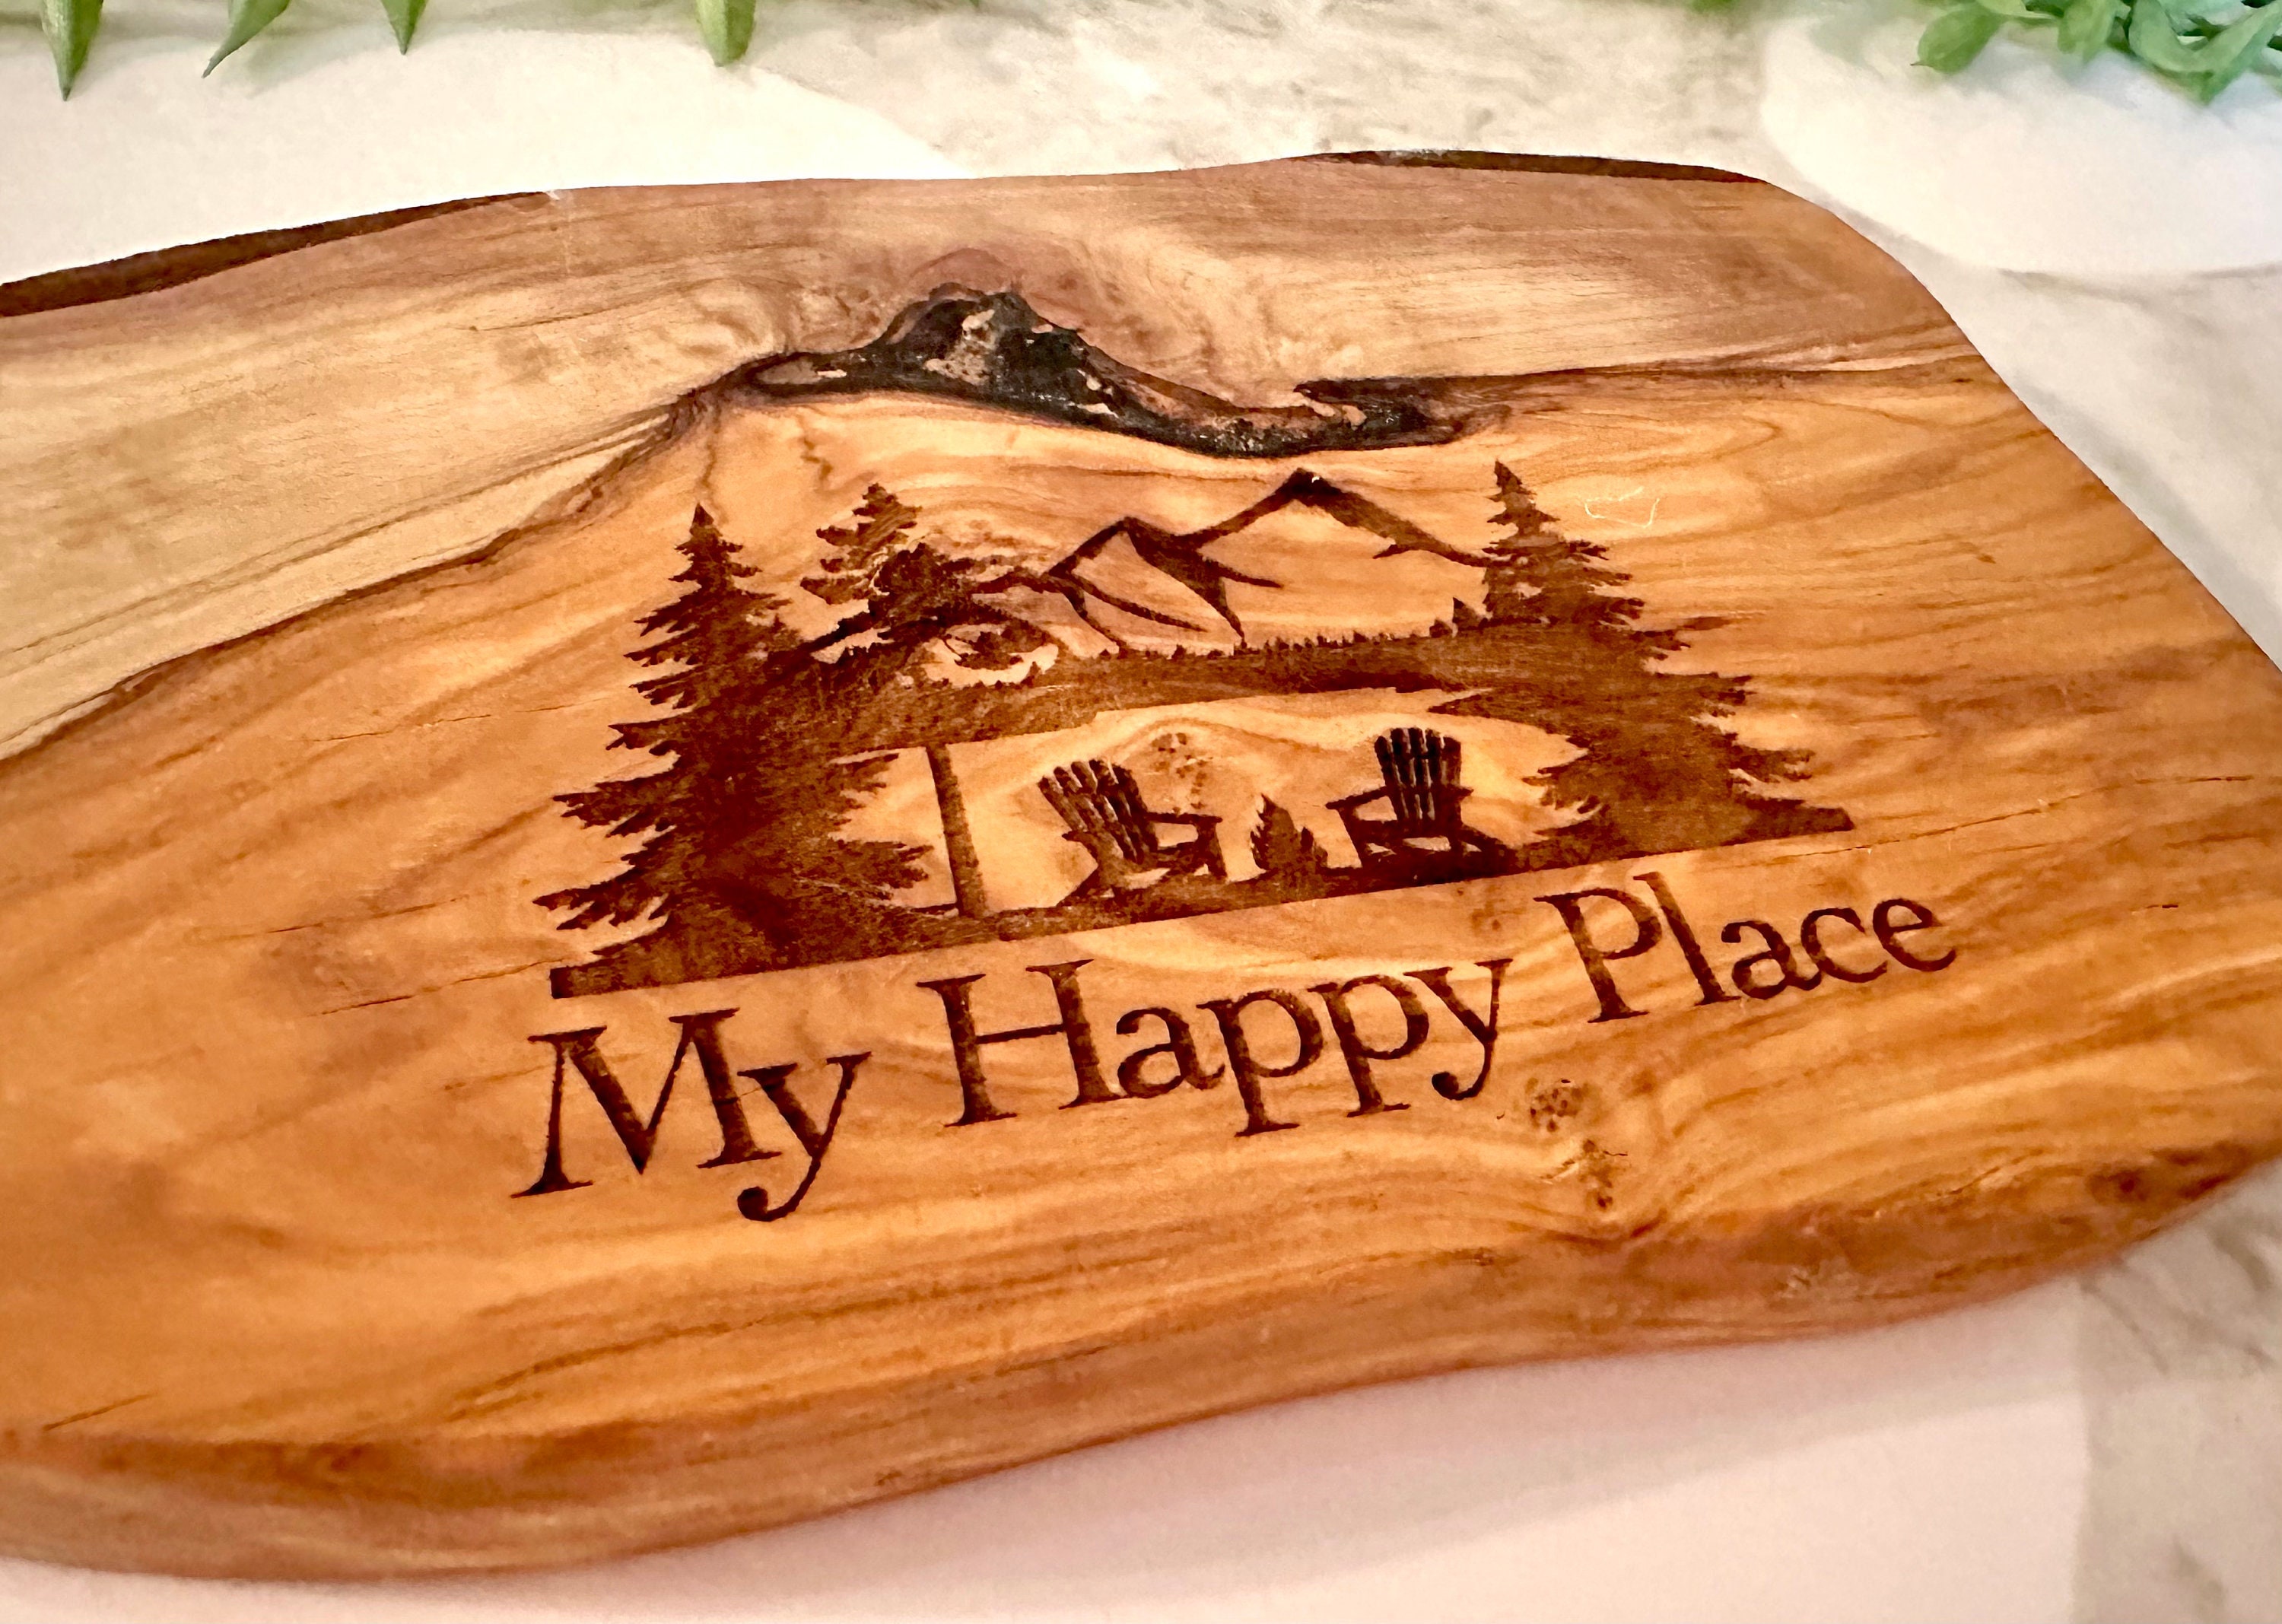 Funny Happy Camper Bamboo Cutting Board With Measurements, Gift for  Adventure Camping Friends Men Fisherman Camp Lover Fishing Camping Lovers  BBQ Outdoorsman RV Gift 